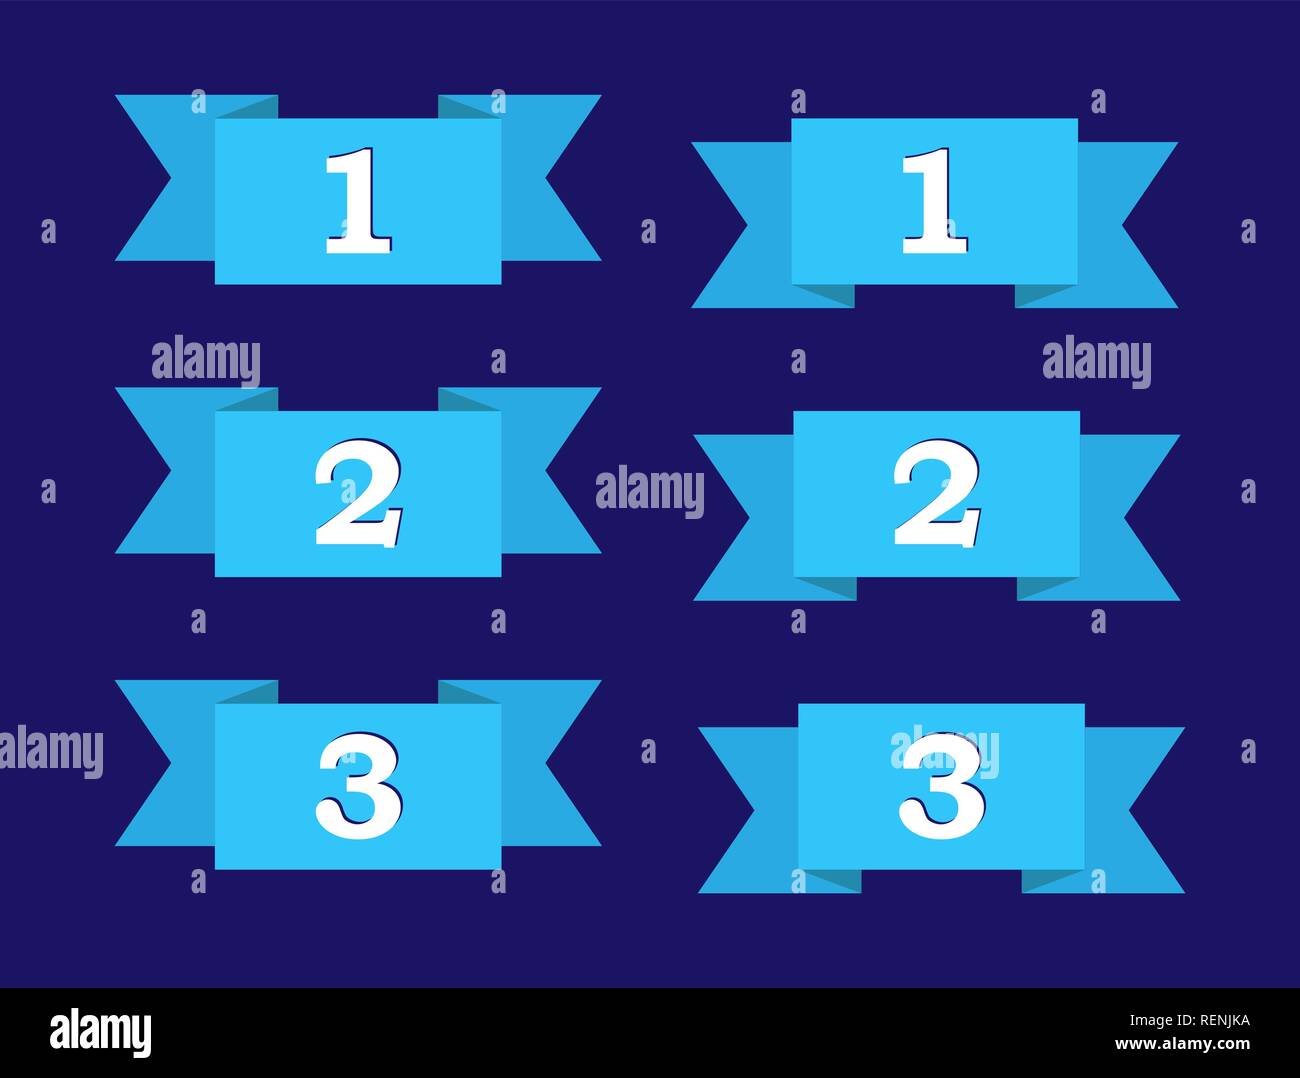 Set Of 6 Blue Ribbons With Numbers 1 2 And 3 Stock Vector Image Art 